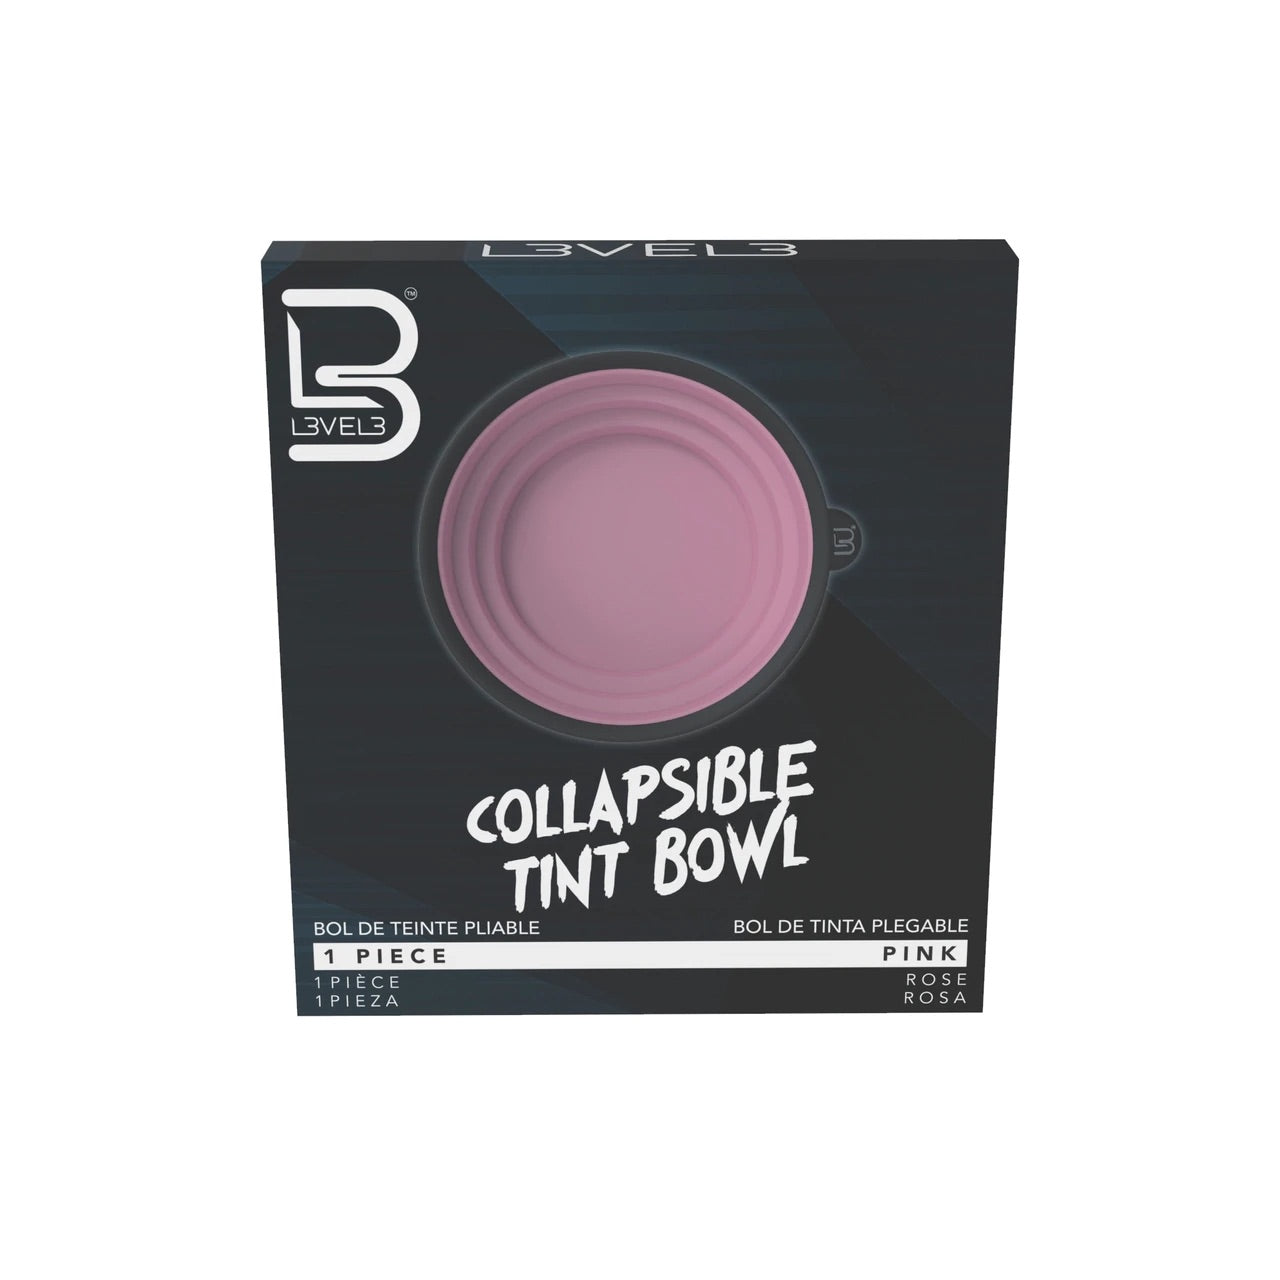 L3VEL3 Collapsible Tint Bowl - Pink